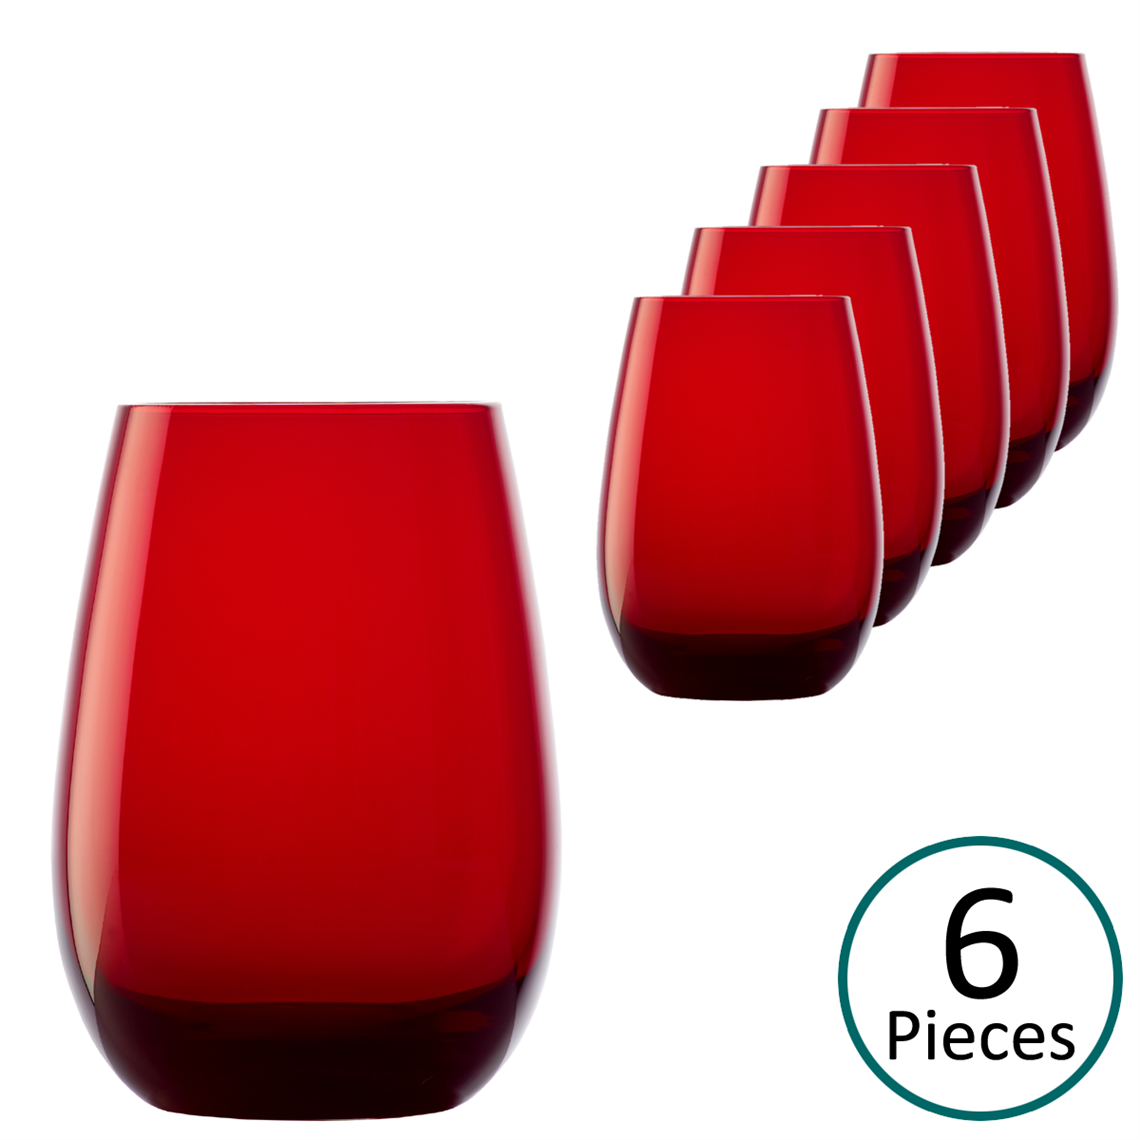 Stolzle Elements Red Water/Mixer Tumbler Glass 465ml - Set of 6